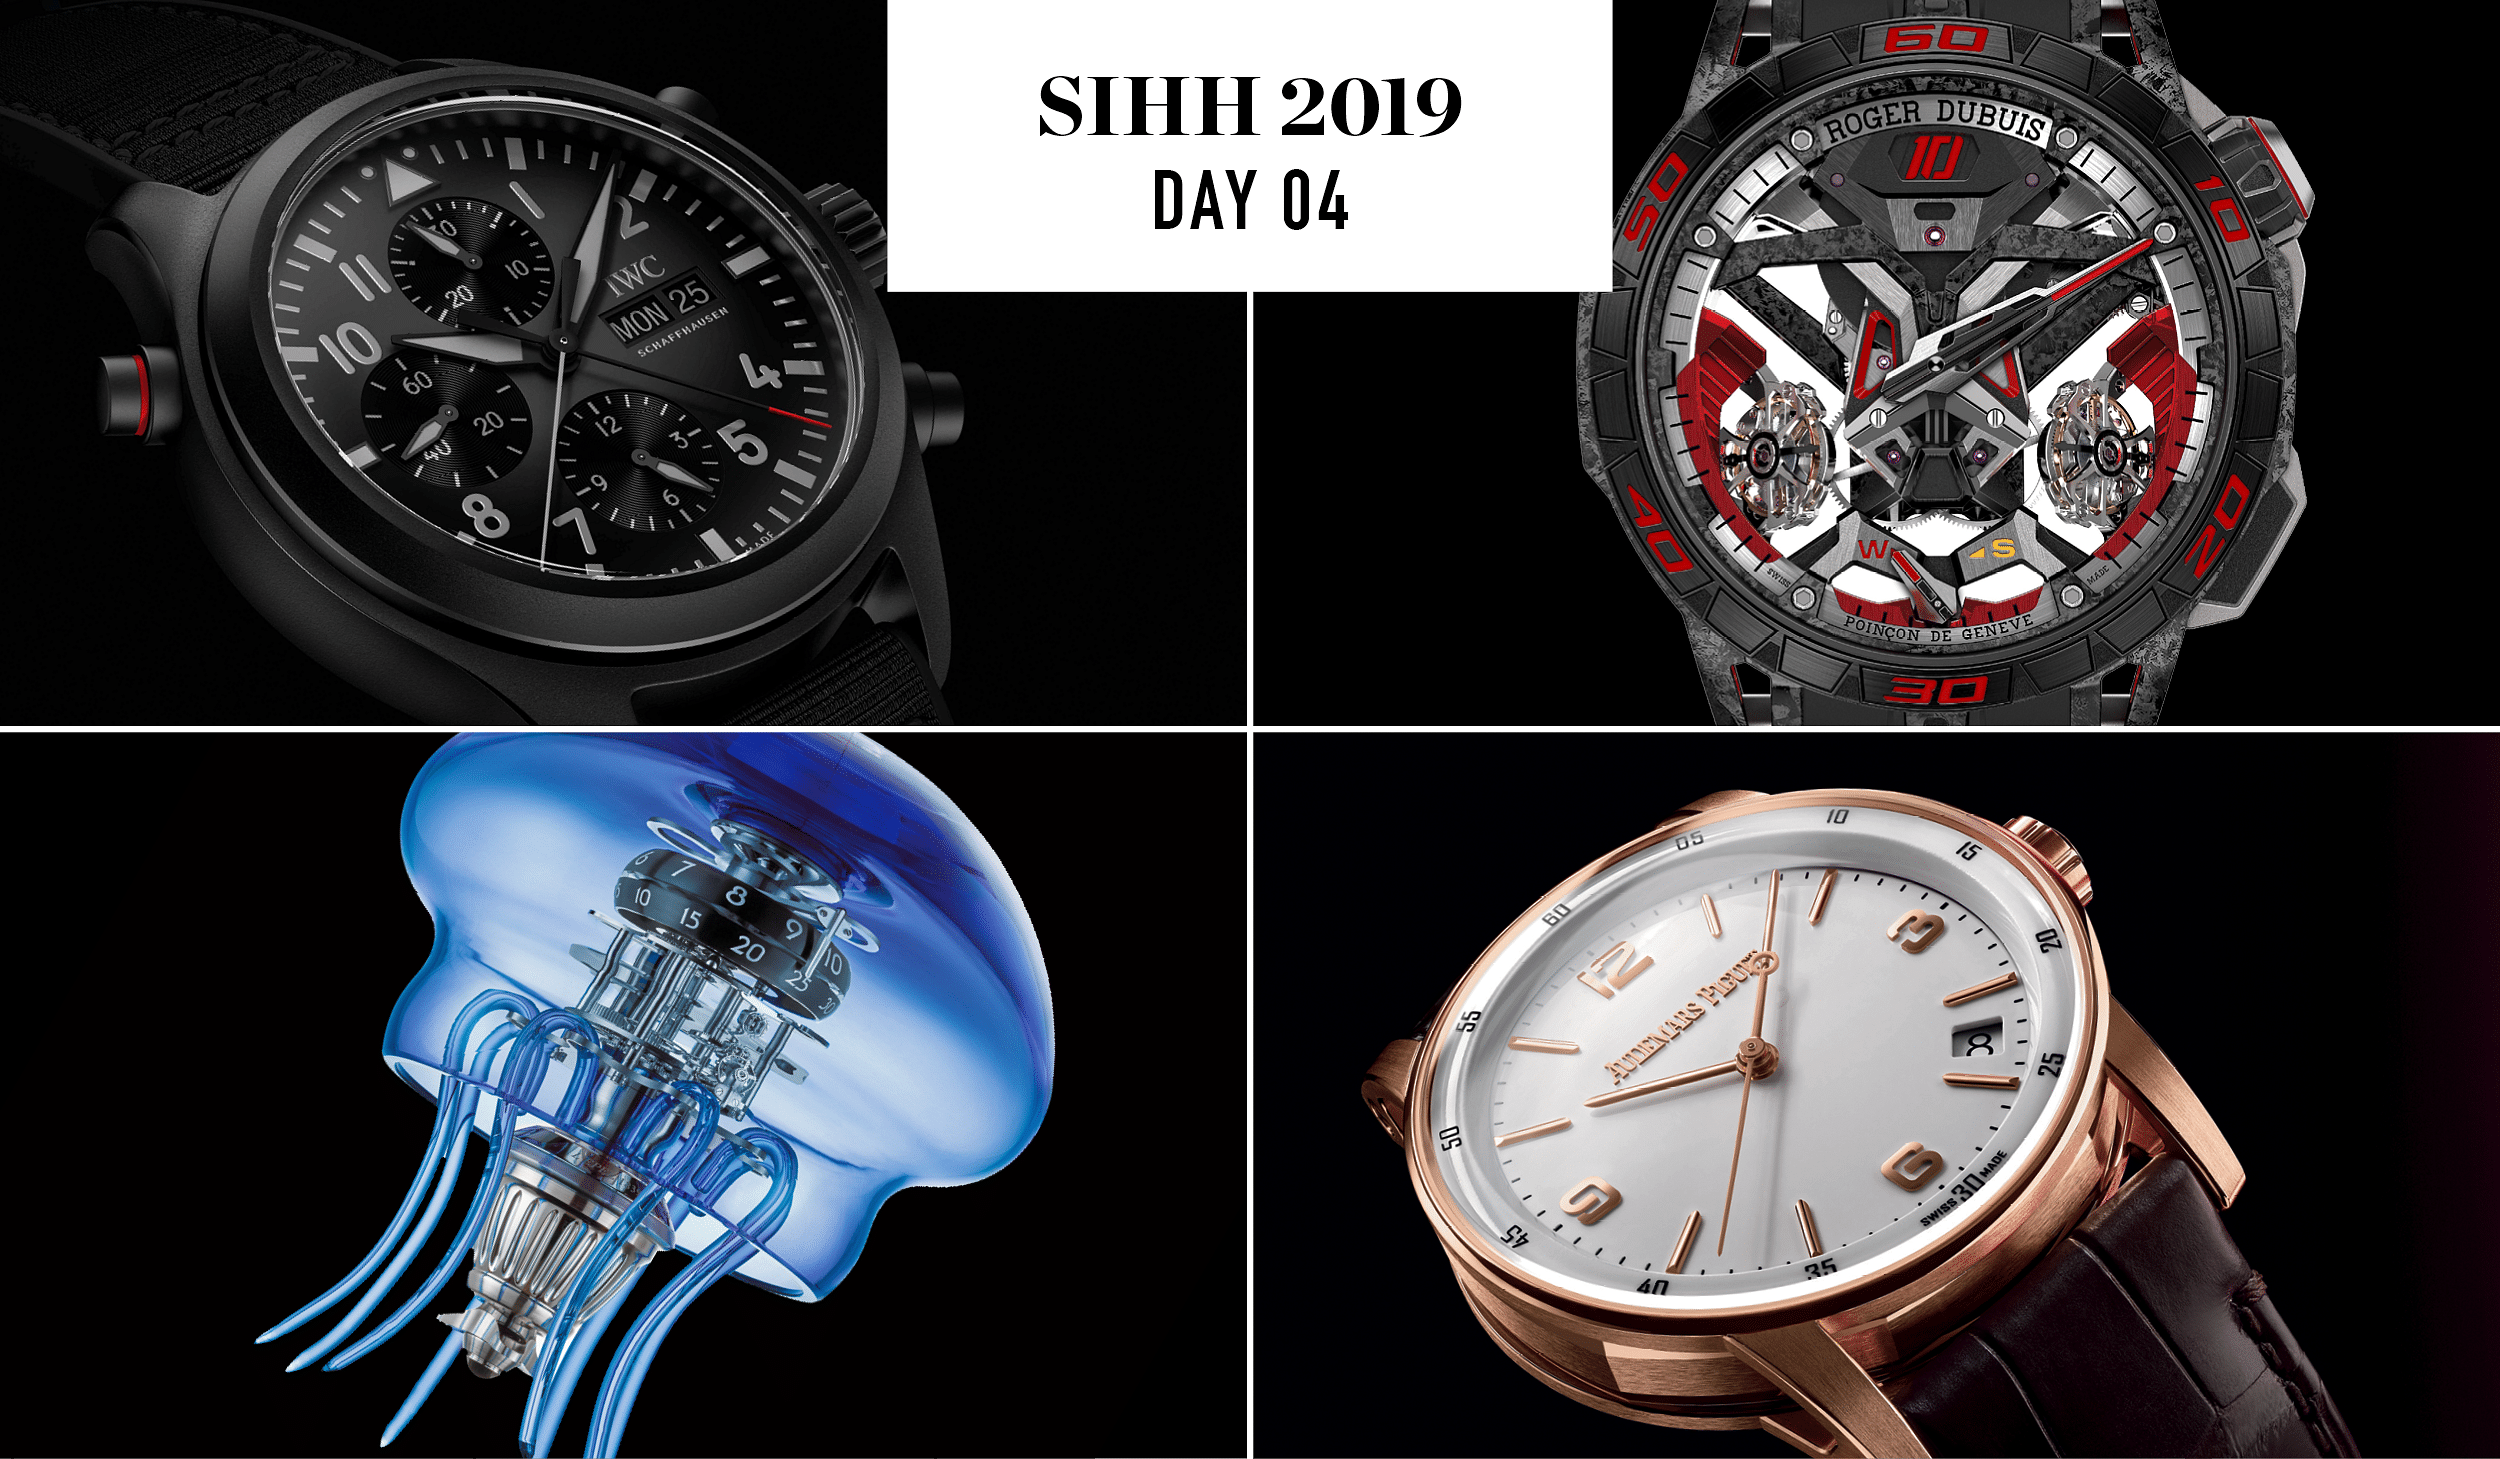 Roger Dubuis, MB&F, IWC, and Audemars Piguet timepieces for SIHH 2019